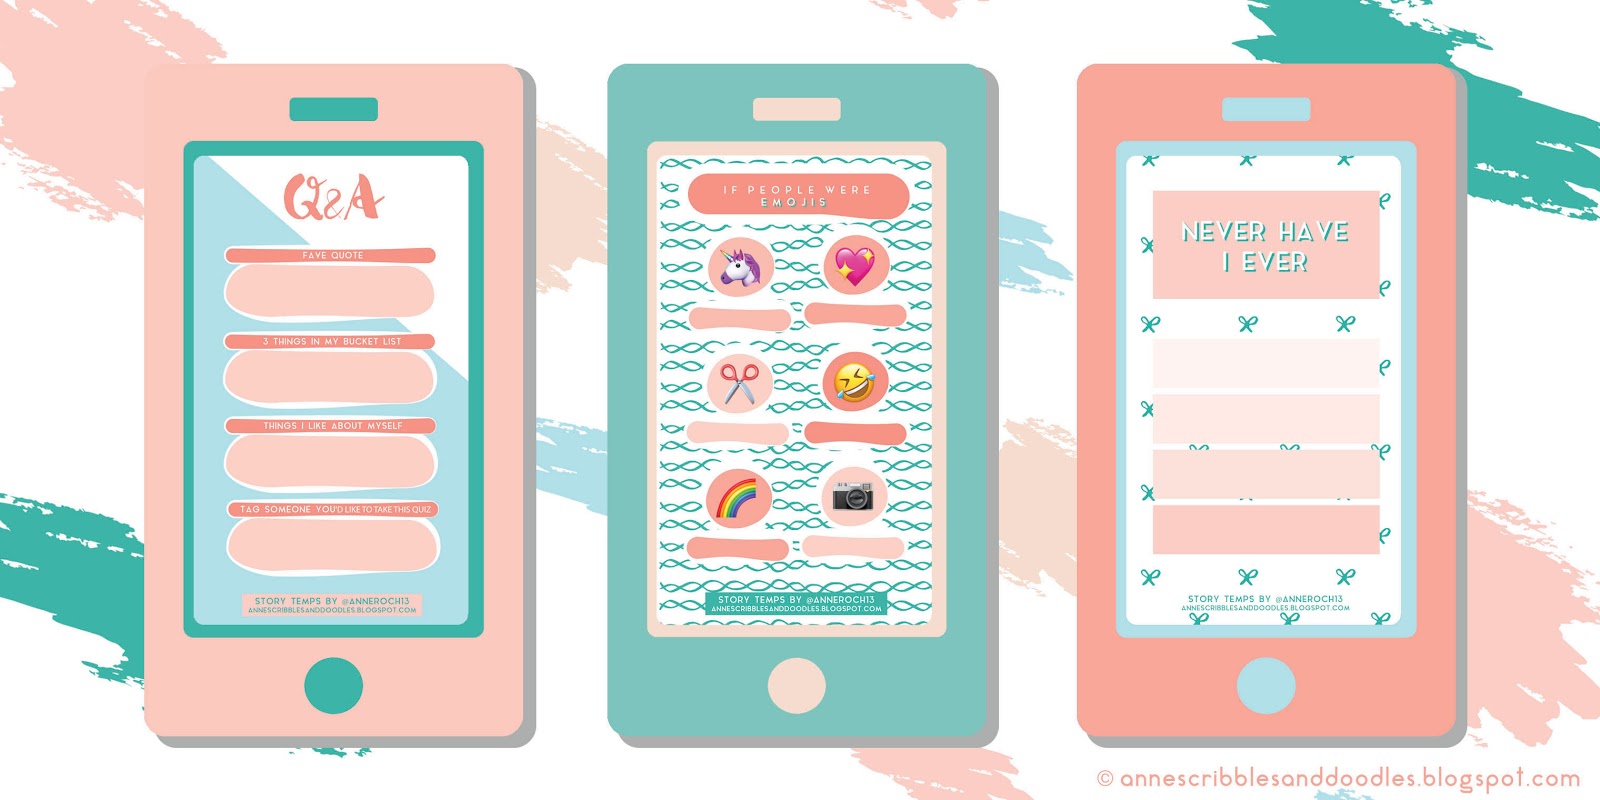 Cute Instagram Story Templates: Getting to Know You | Anne's Scribbles and Doodles